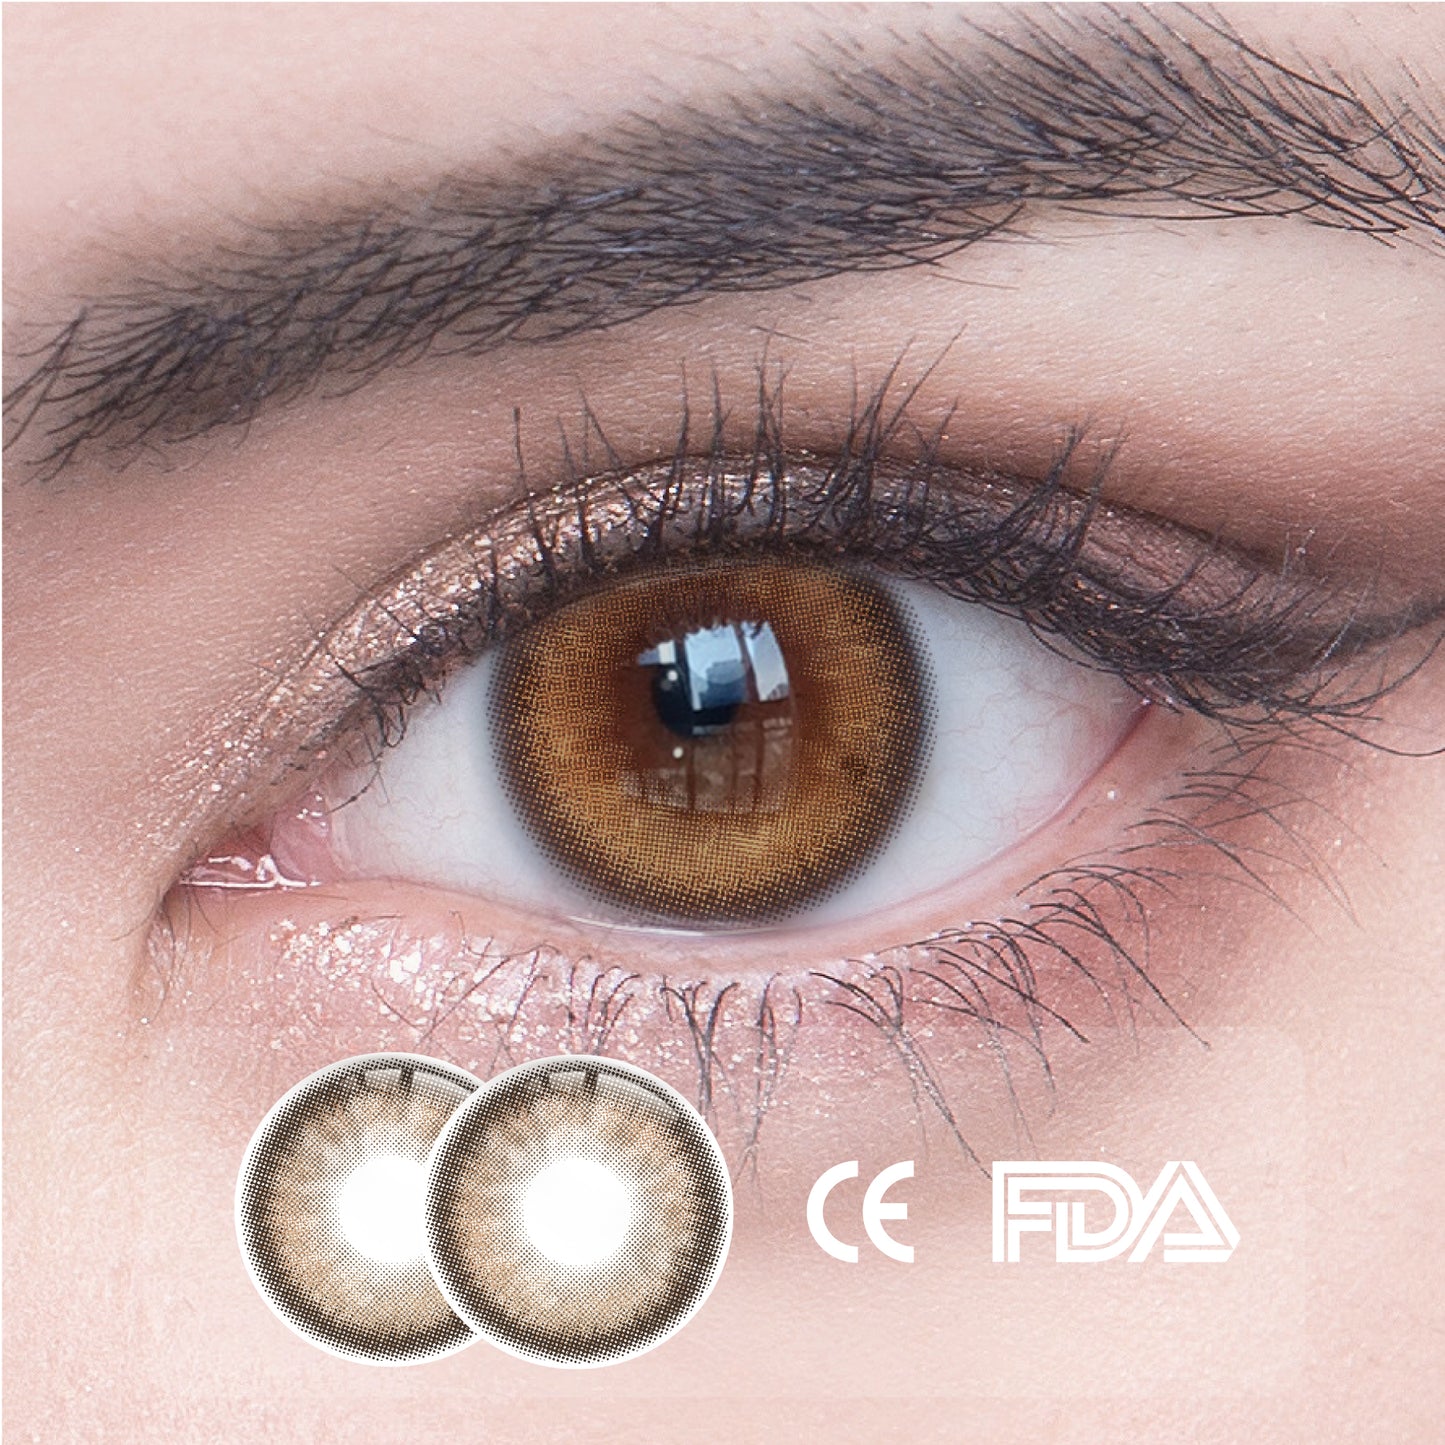 1pcs FDA Certificate Eyes Colorful Contact Lenses - Waltz brown